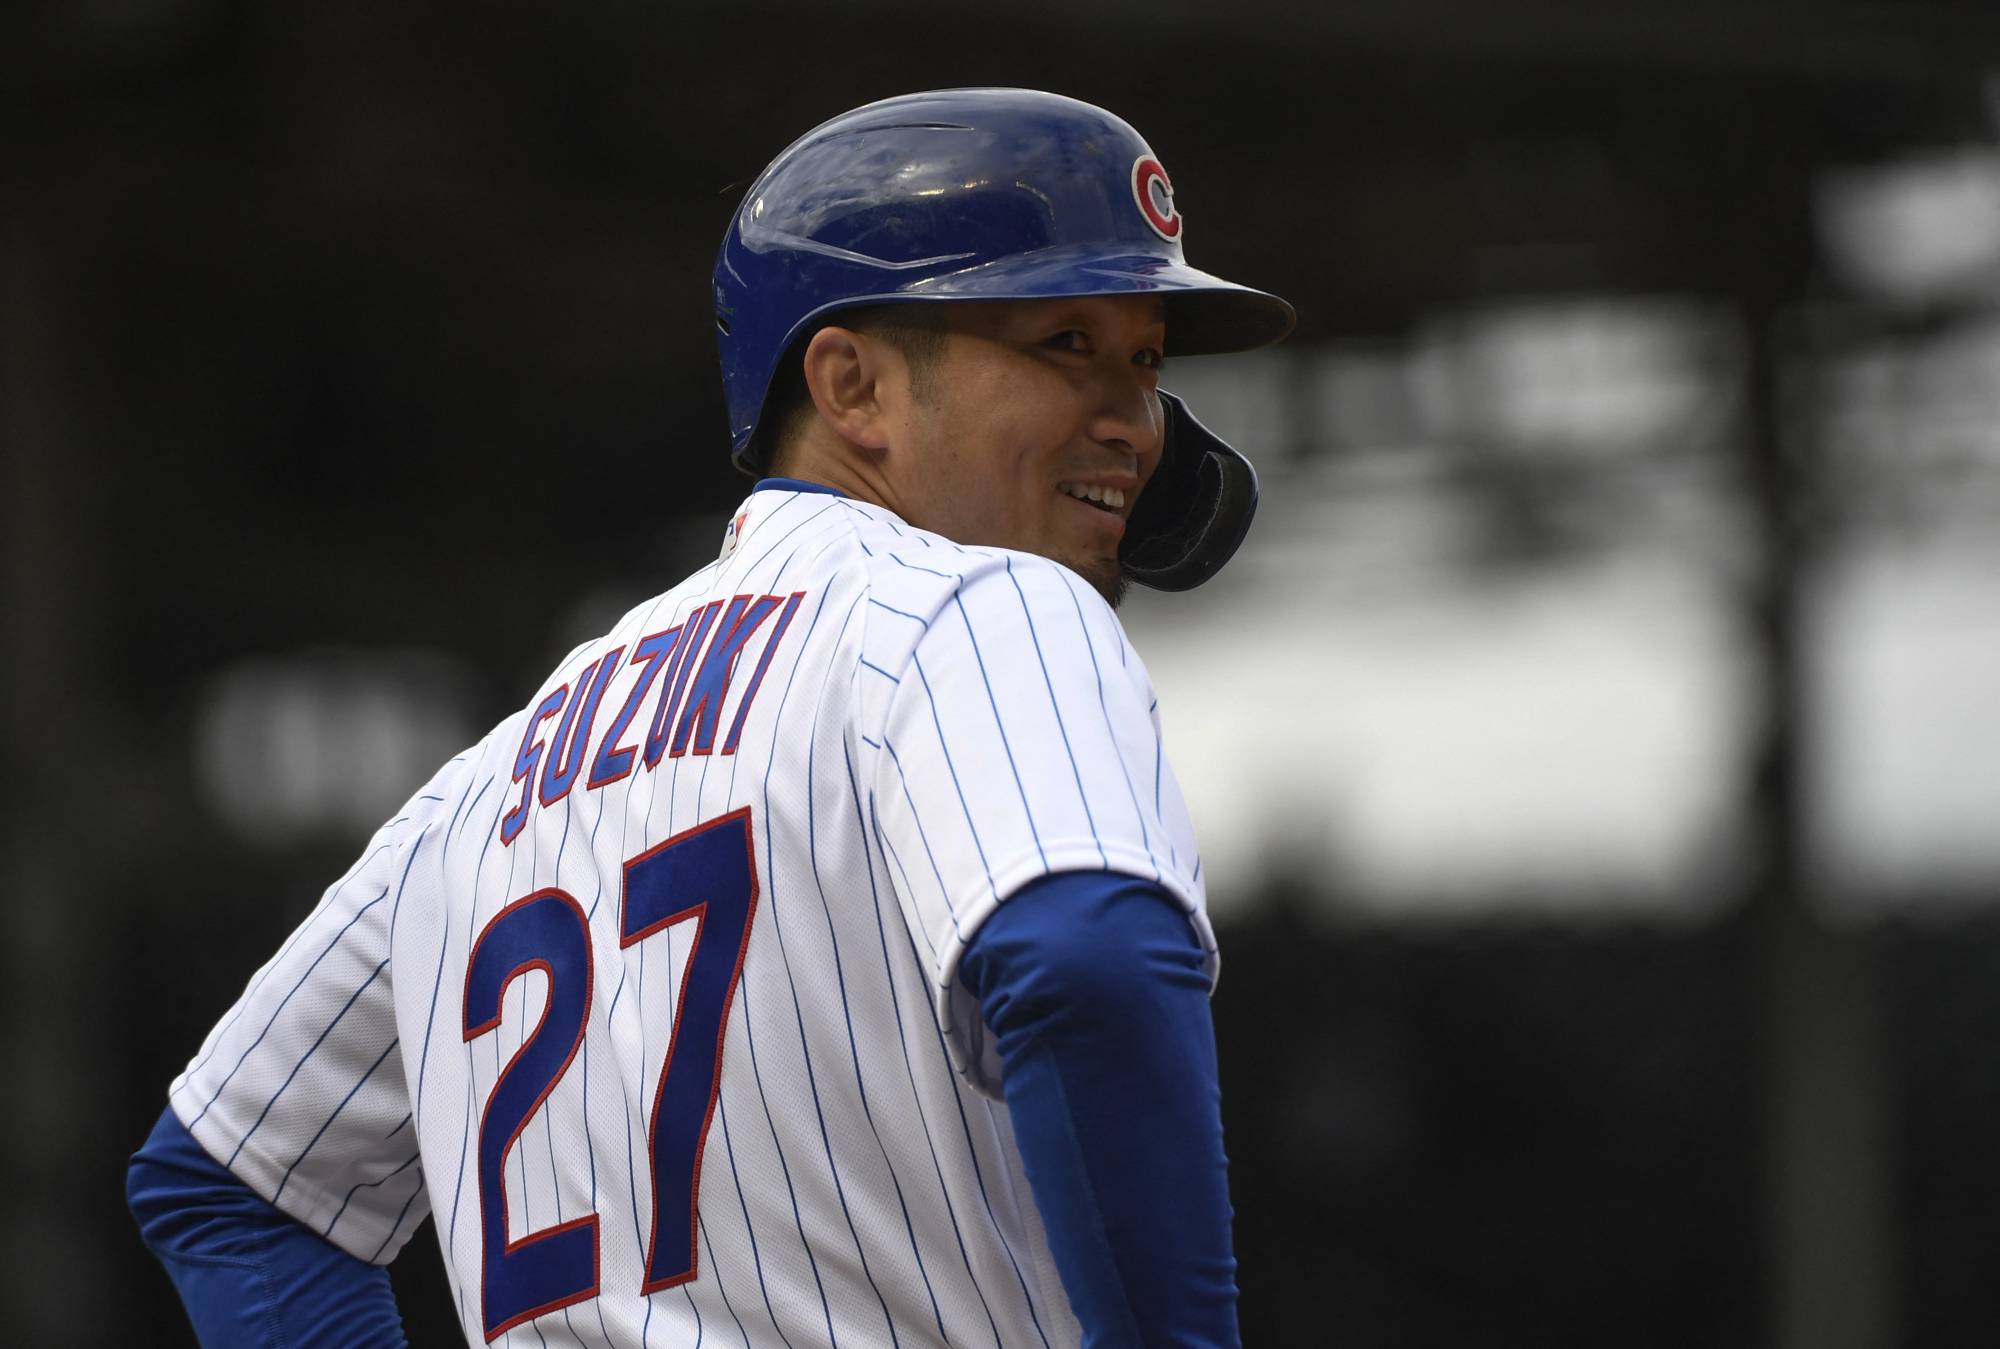 Chicago Cubs Slugger Exceeding Expectations in First Season